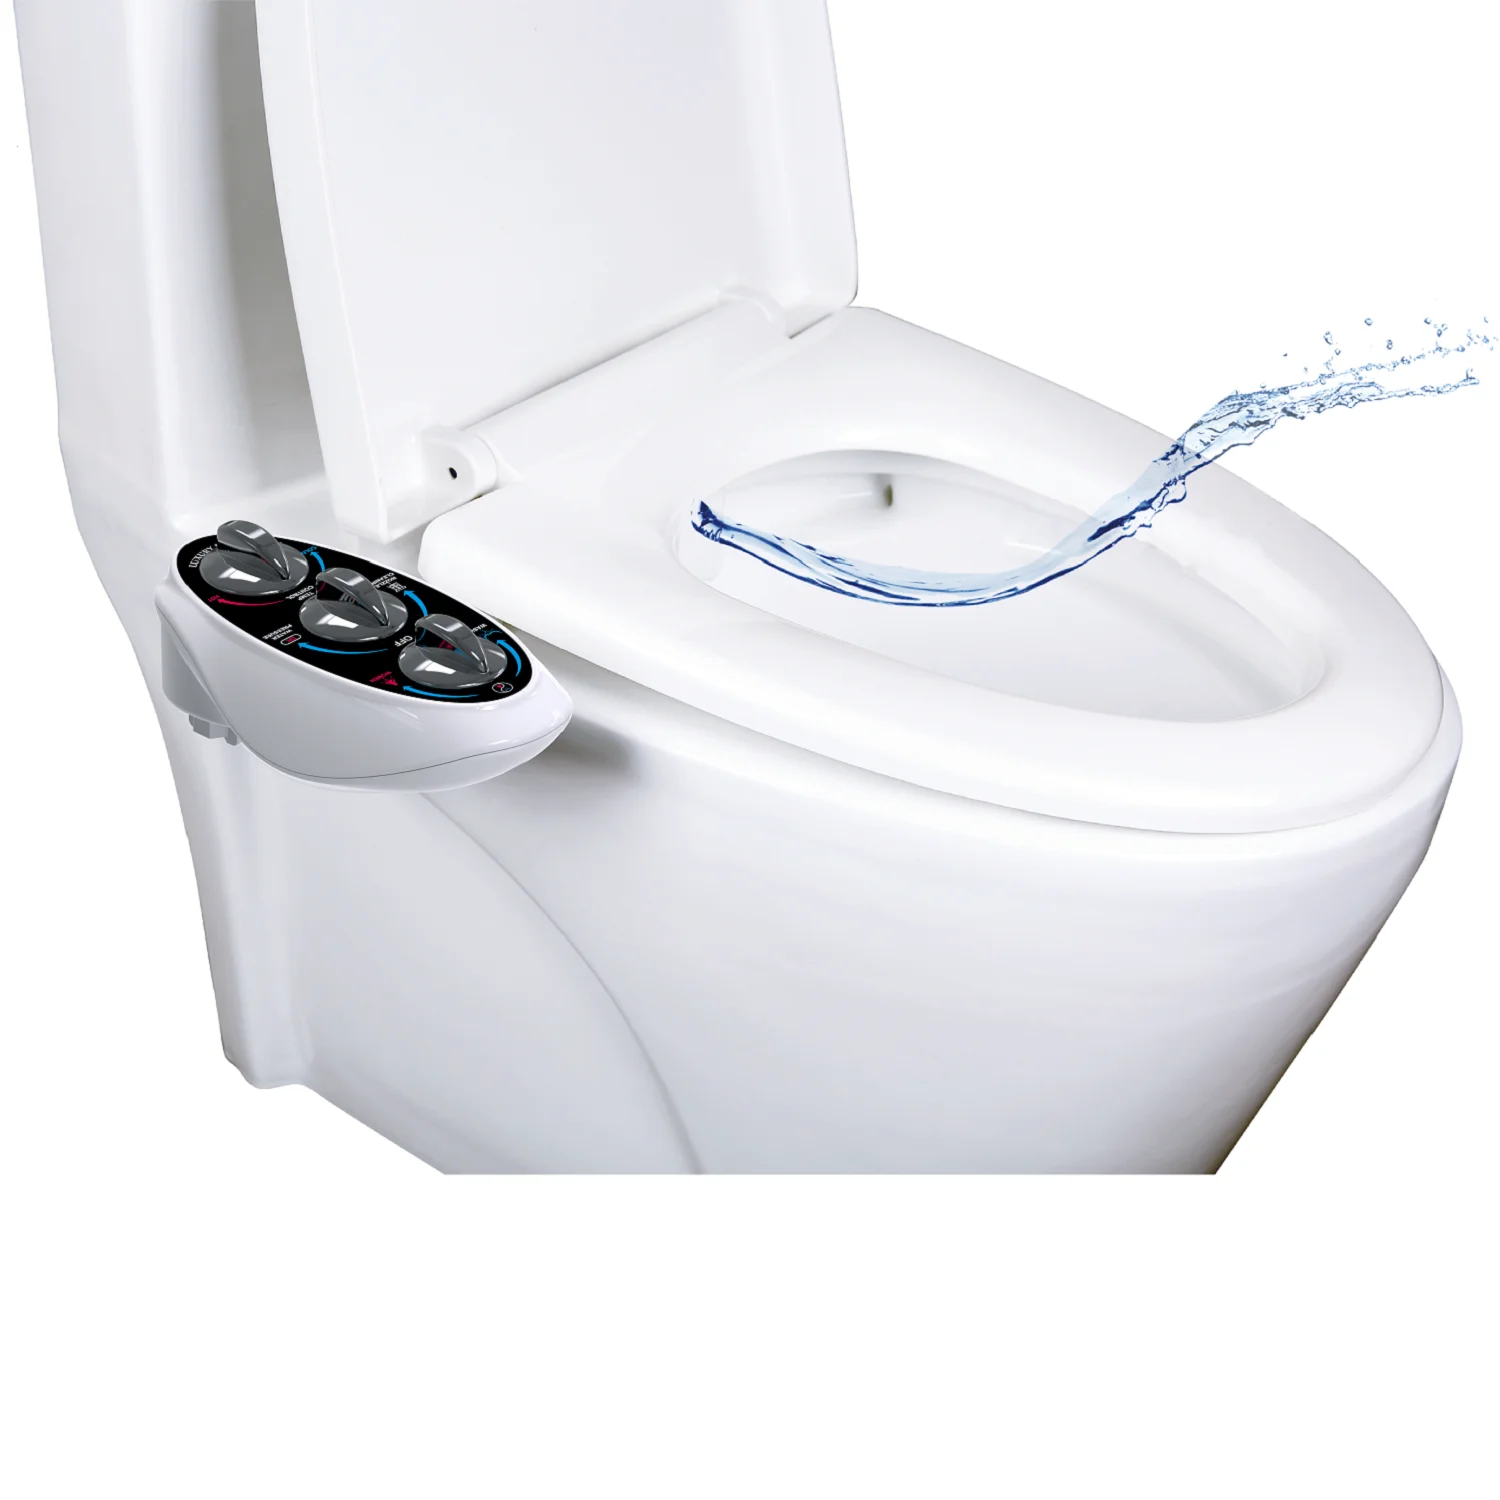 Wholesale High Cold and Warm water manual Bidet attachment NMB2100-PBC From m.alibaba.com